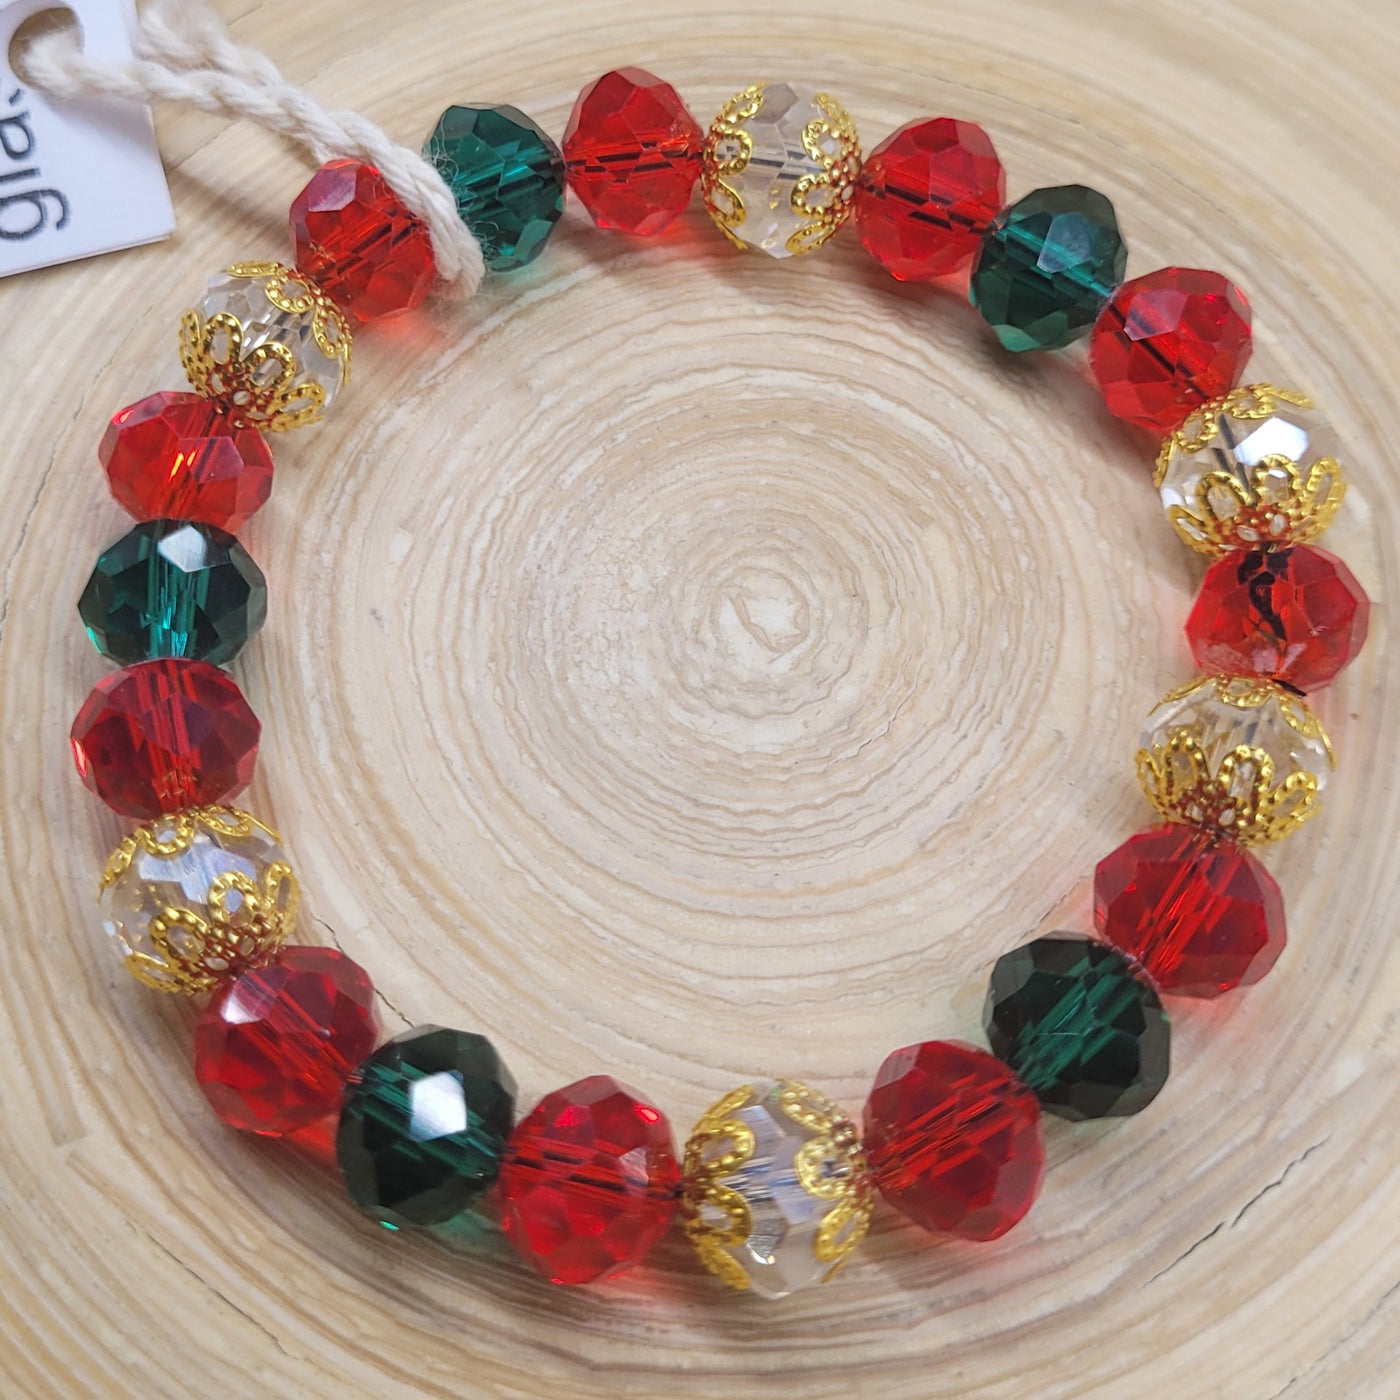 DBV- Bingcute Briolette Crystal Sian Red and Emerald Glass Beads with Gold Spacer Bead Bracelet